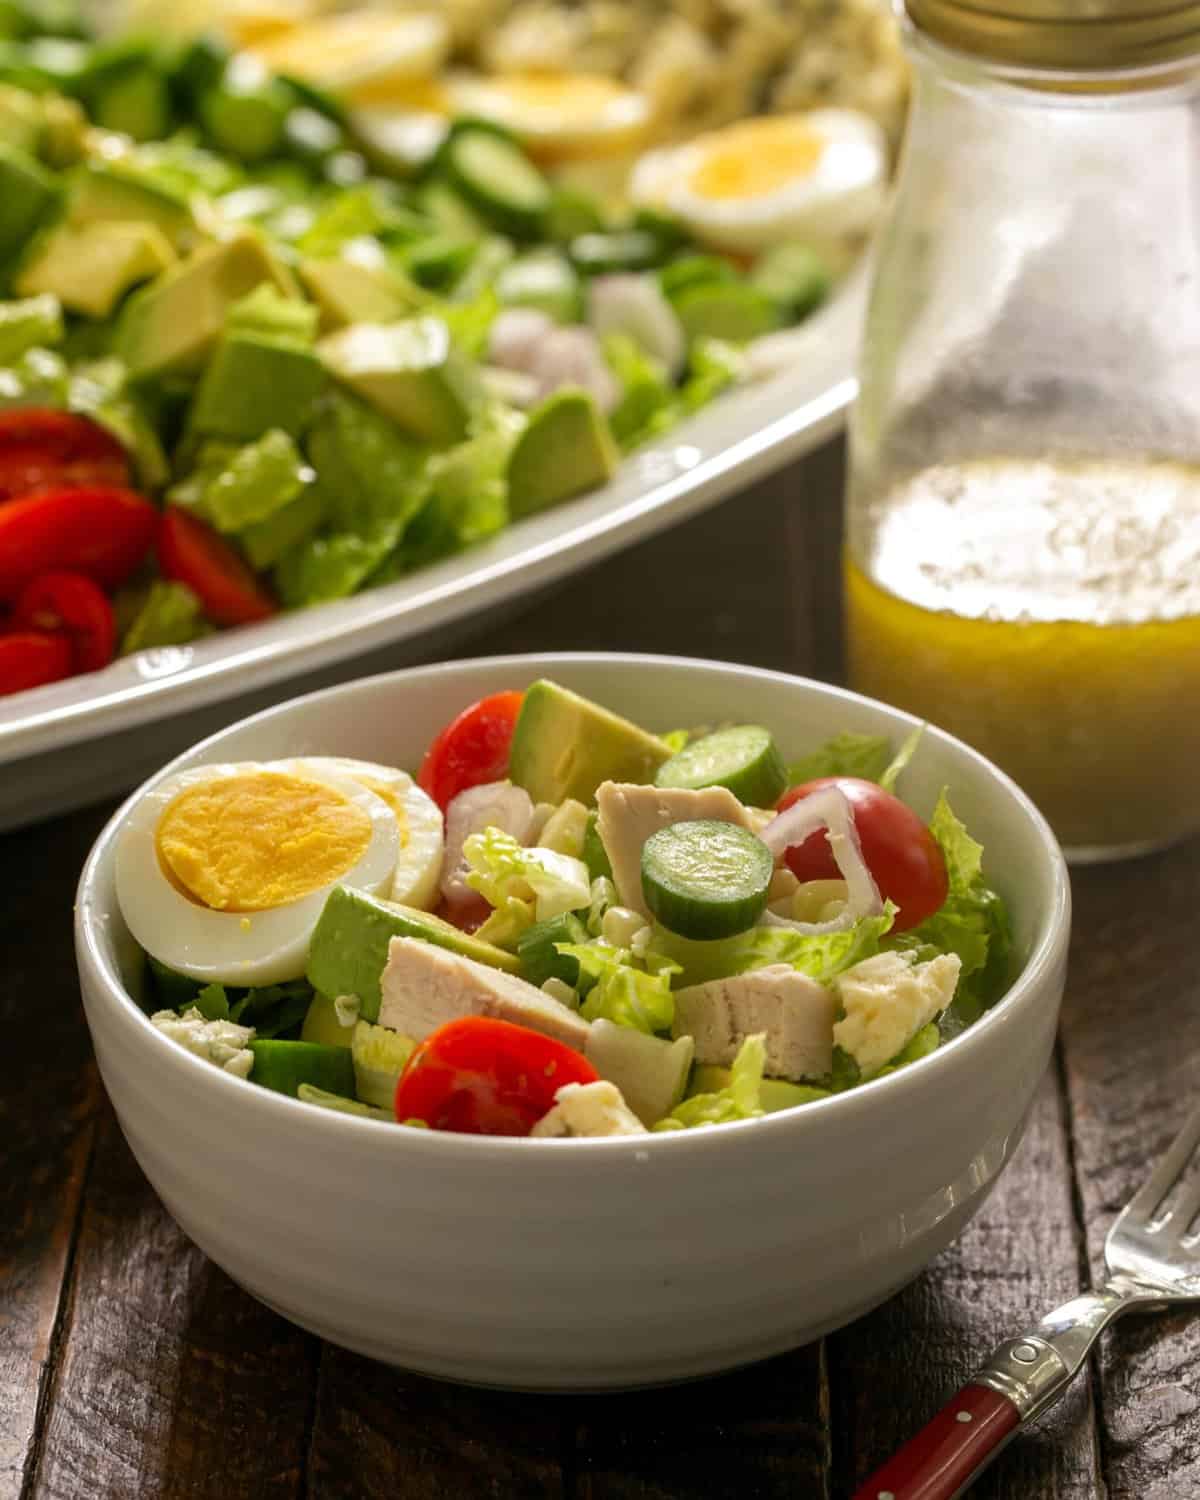 A bowl of Cobb salad wih the serving tray and jar of dressing in the background.